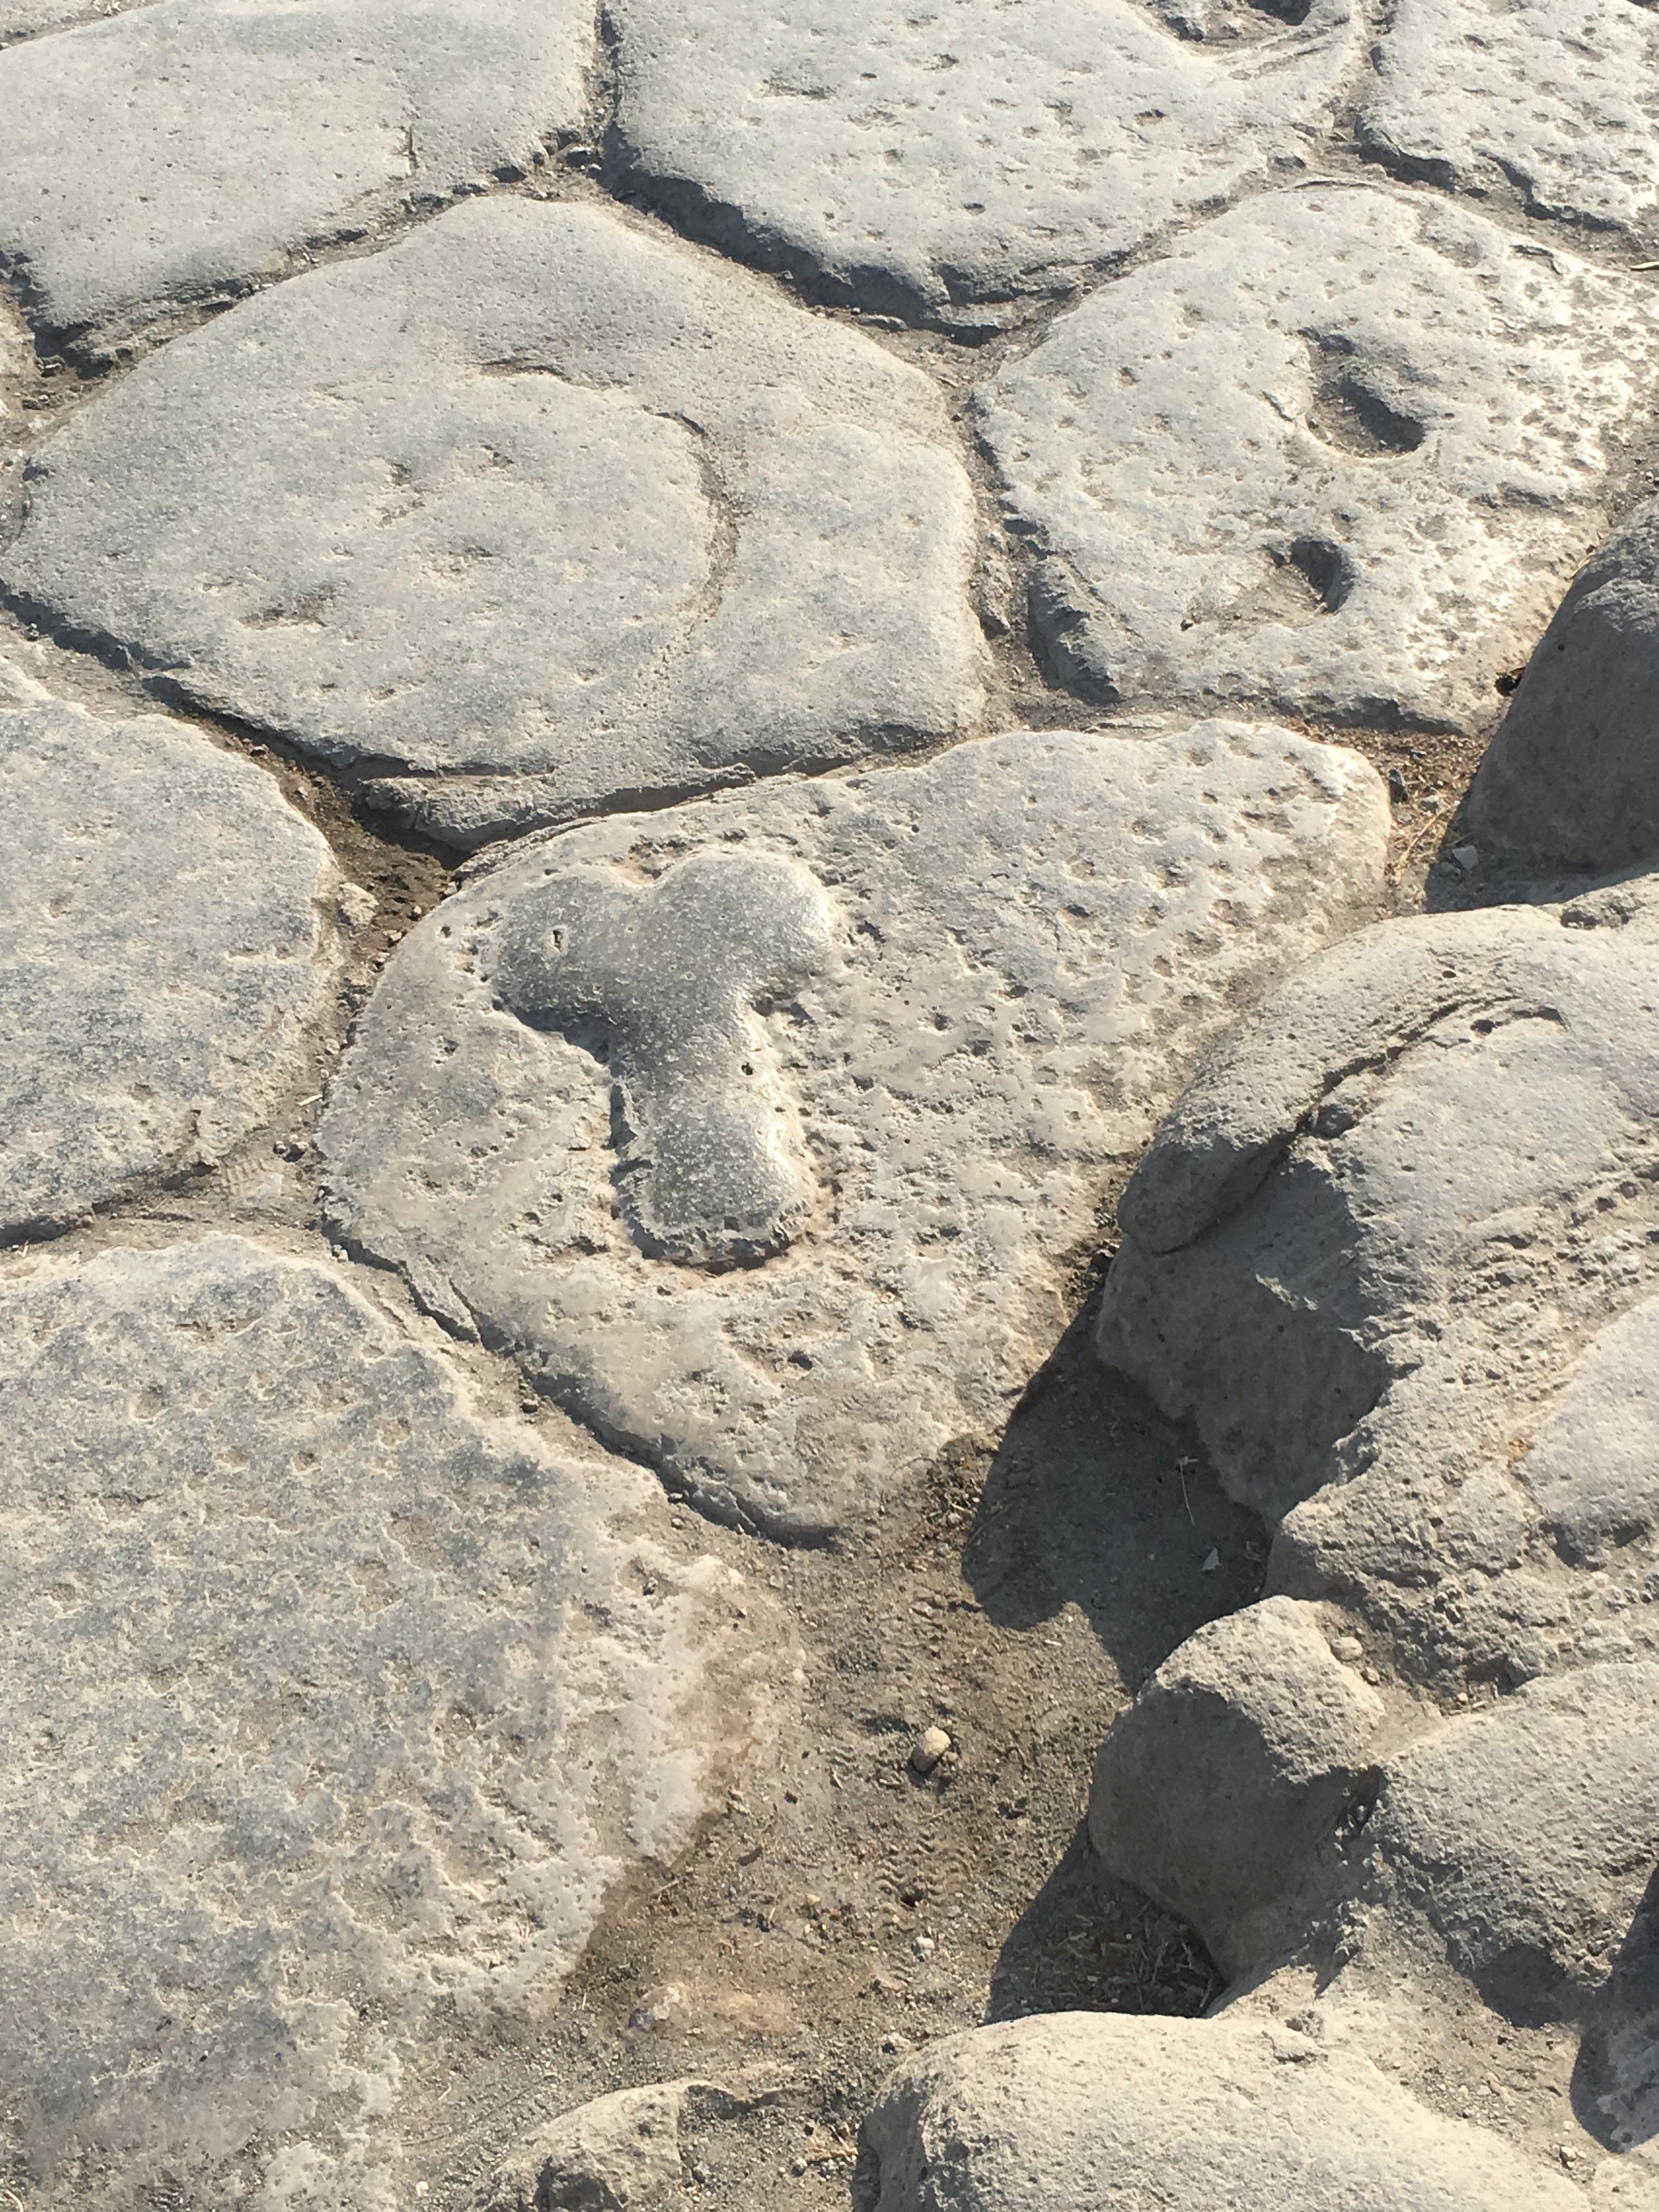 Went to Pompeii and learned they used to mark where the red light district began.